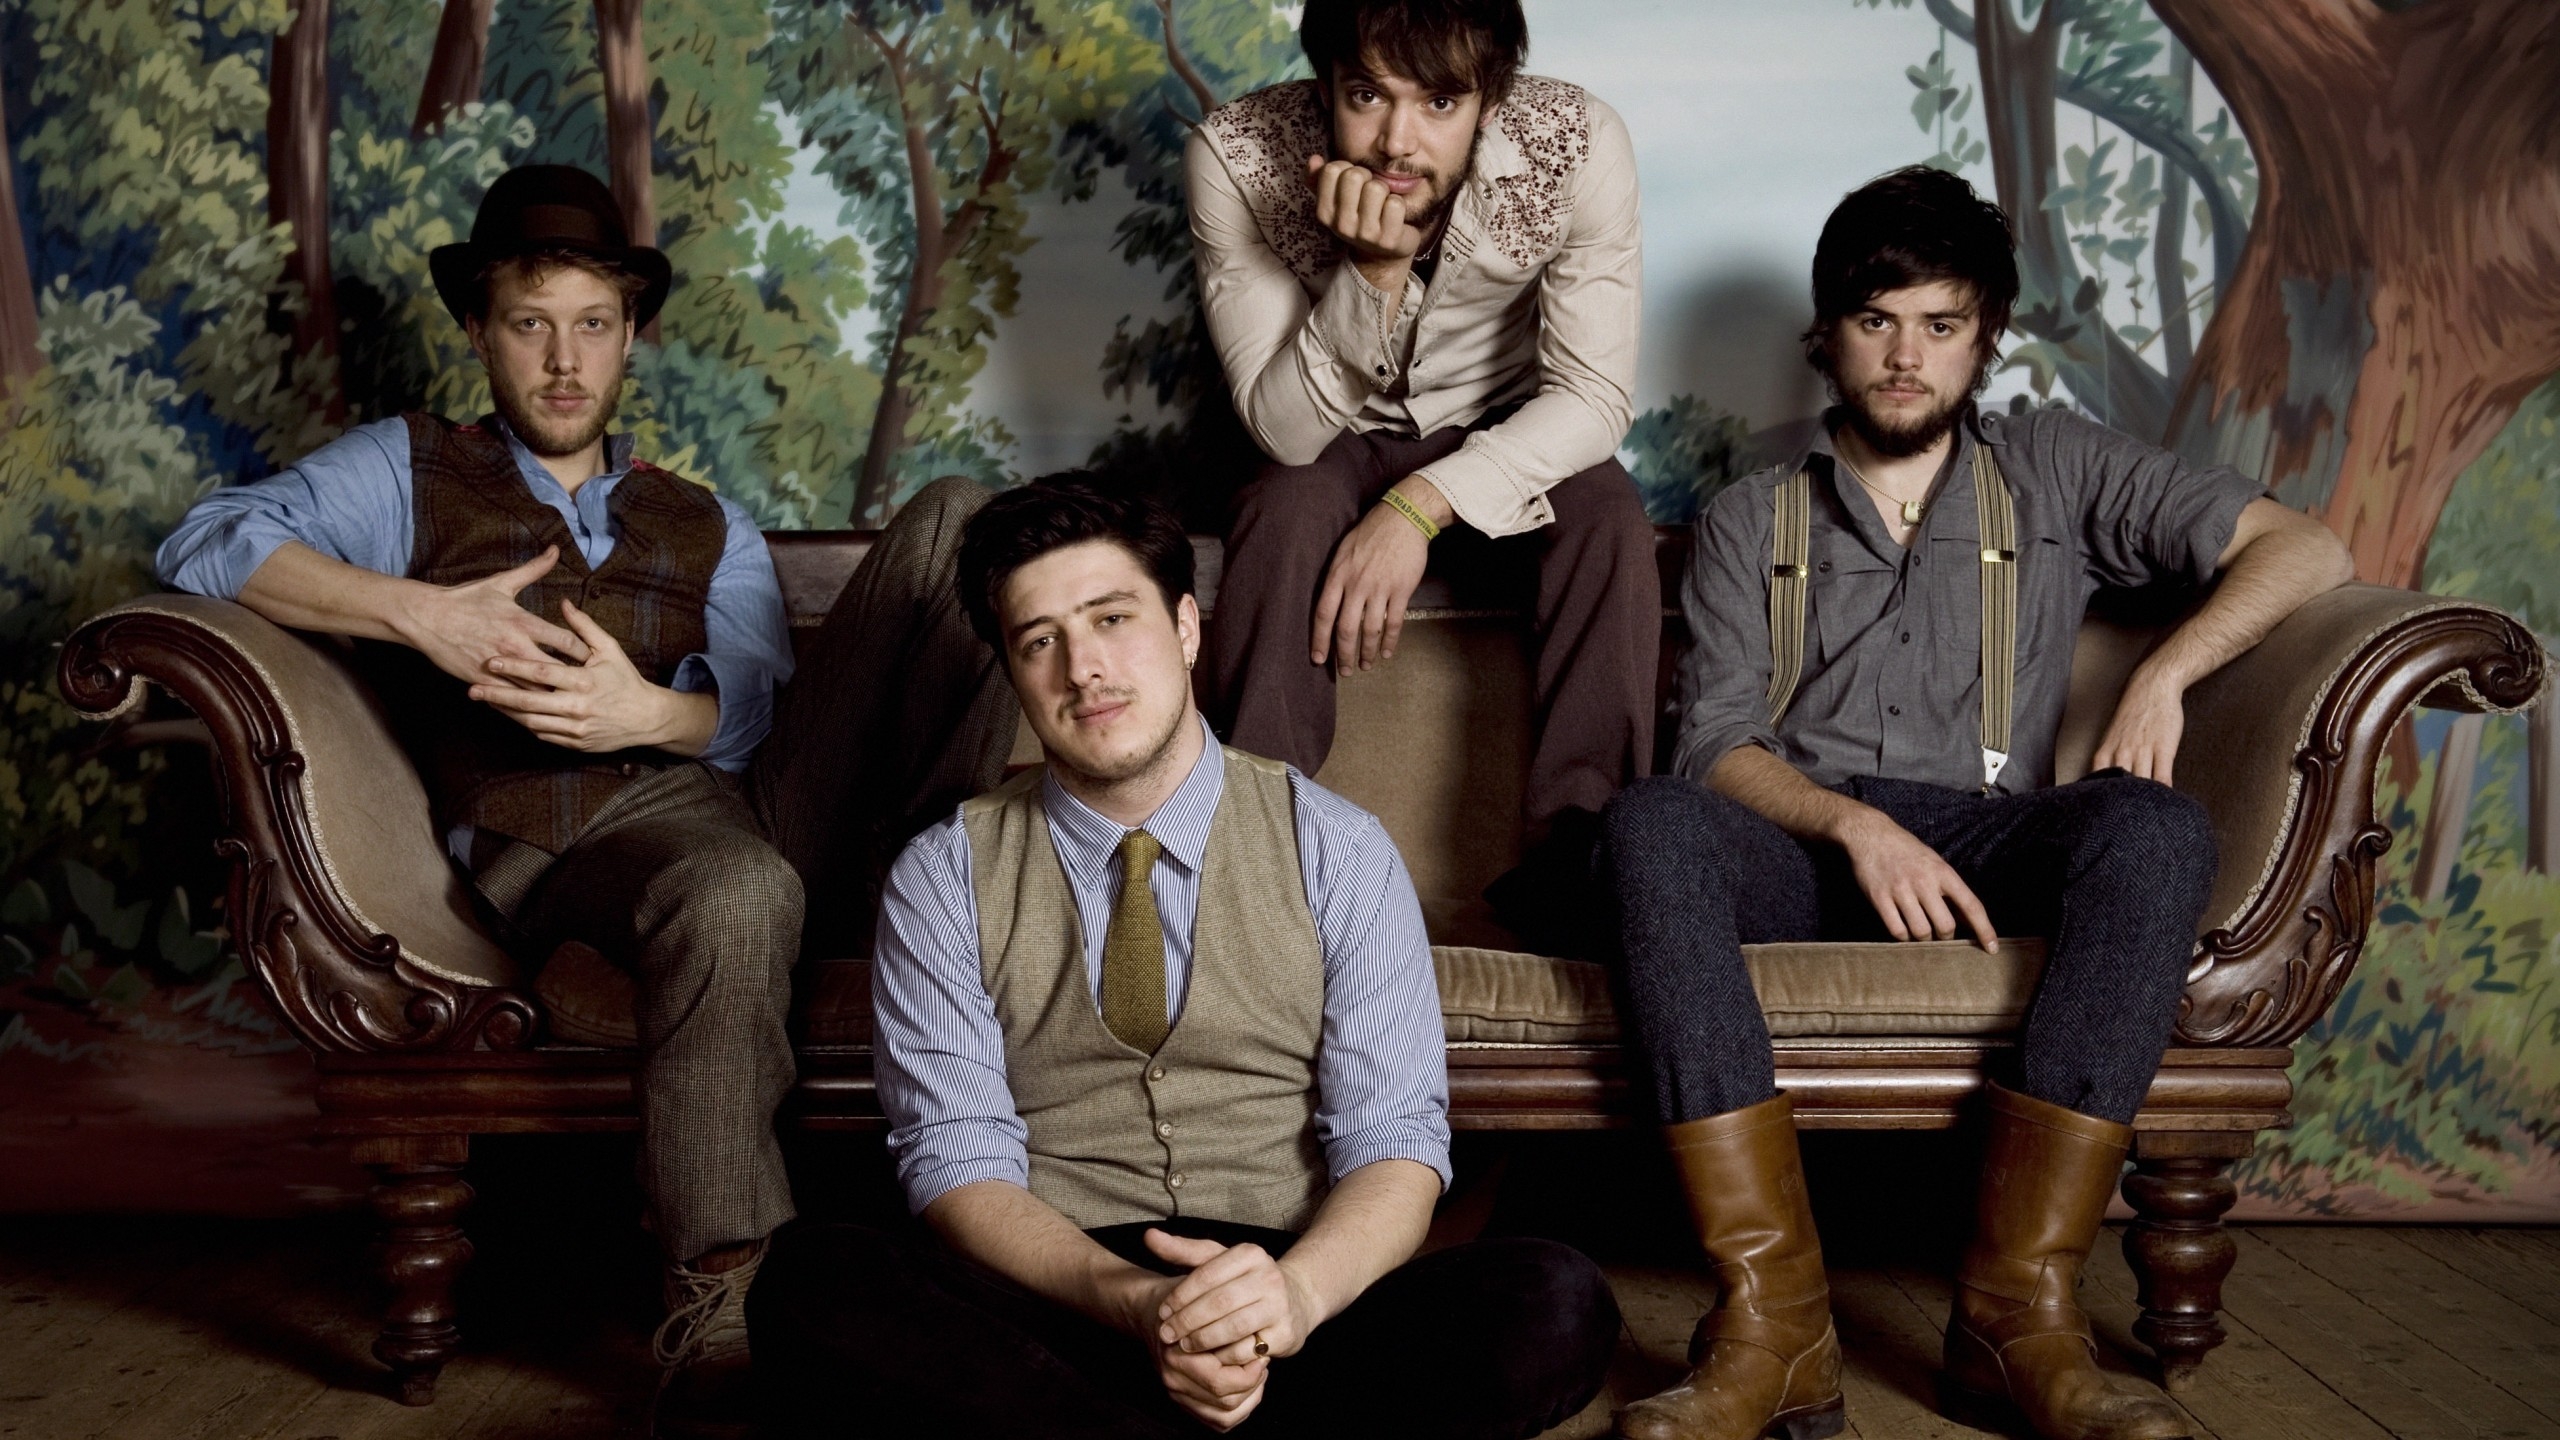 Mumford and Sons for 2560x1440 HDTV resolution